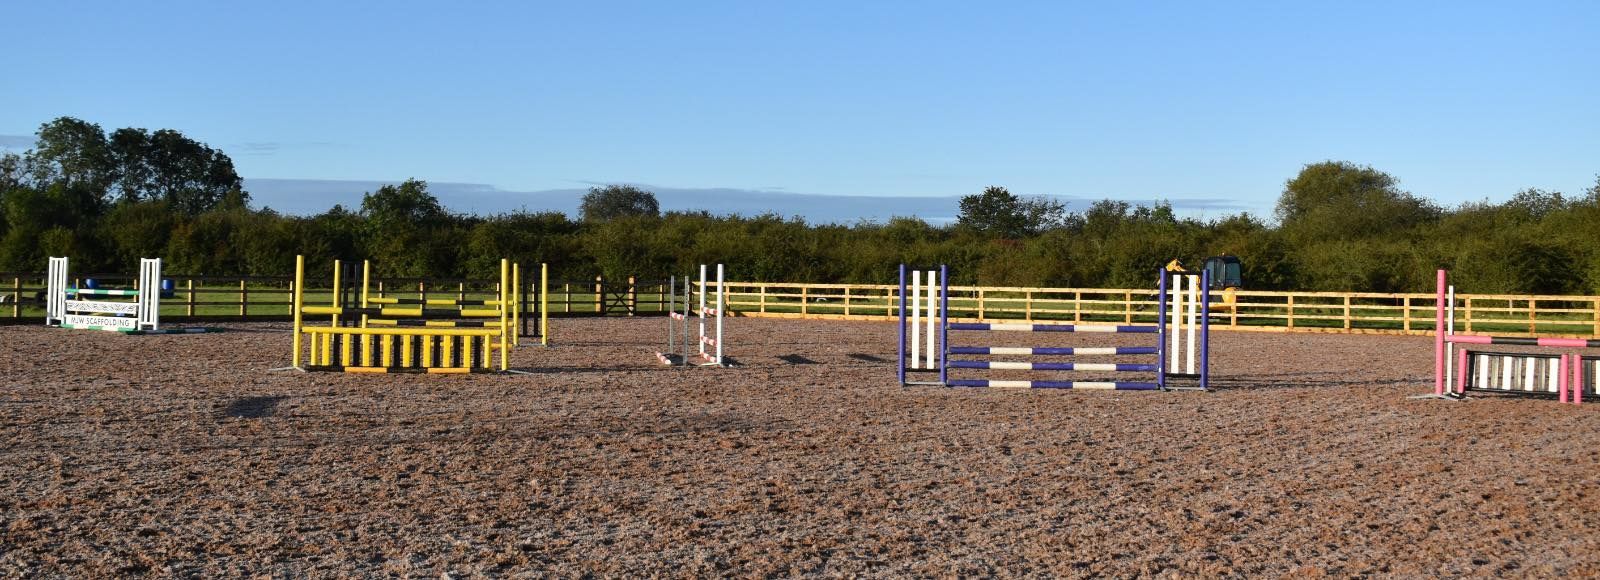 Facility hire costs at Arkenfield stables